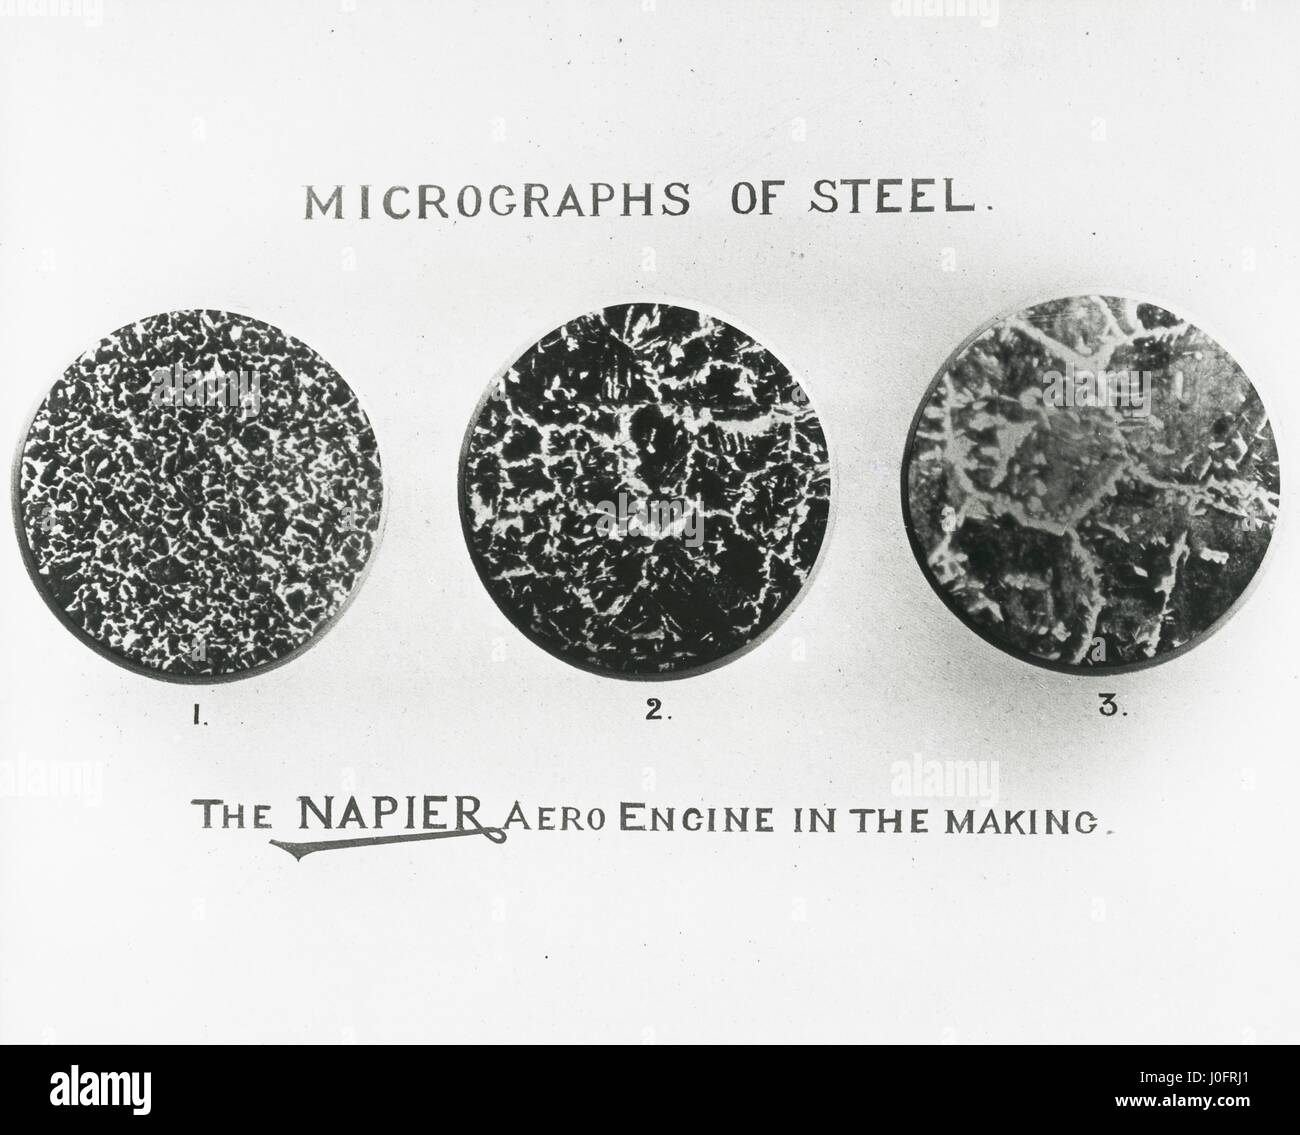 The Napier aero engine in the making: micrographs of steel Stock Photo